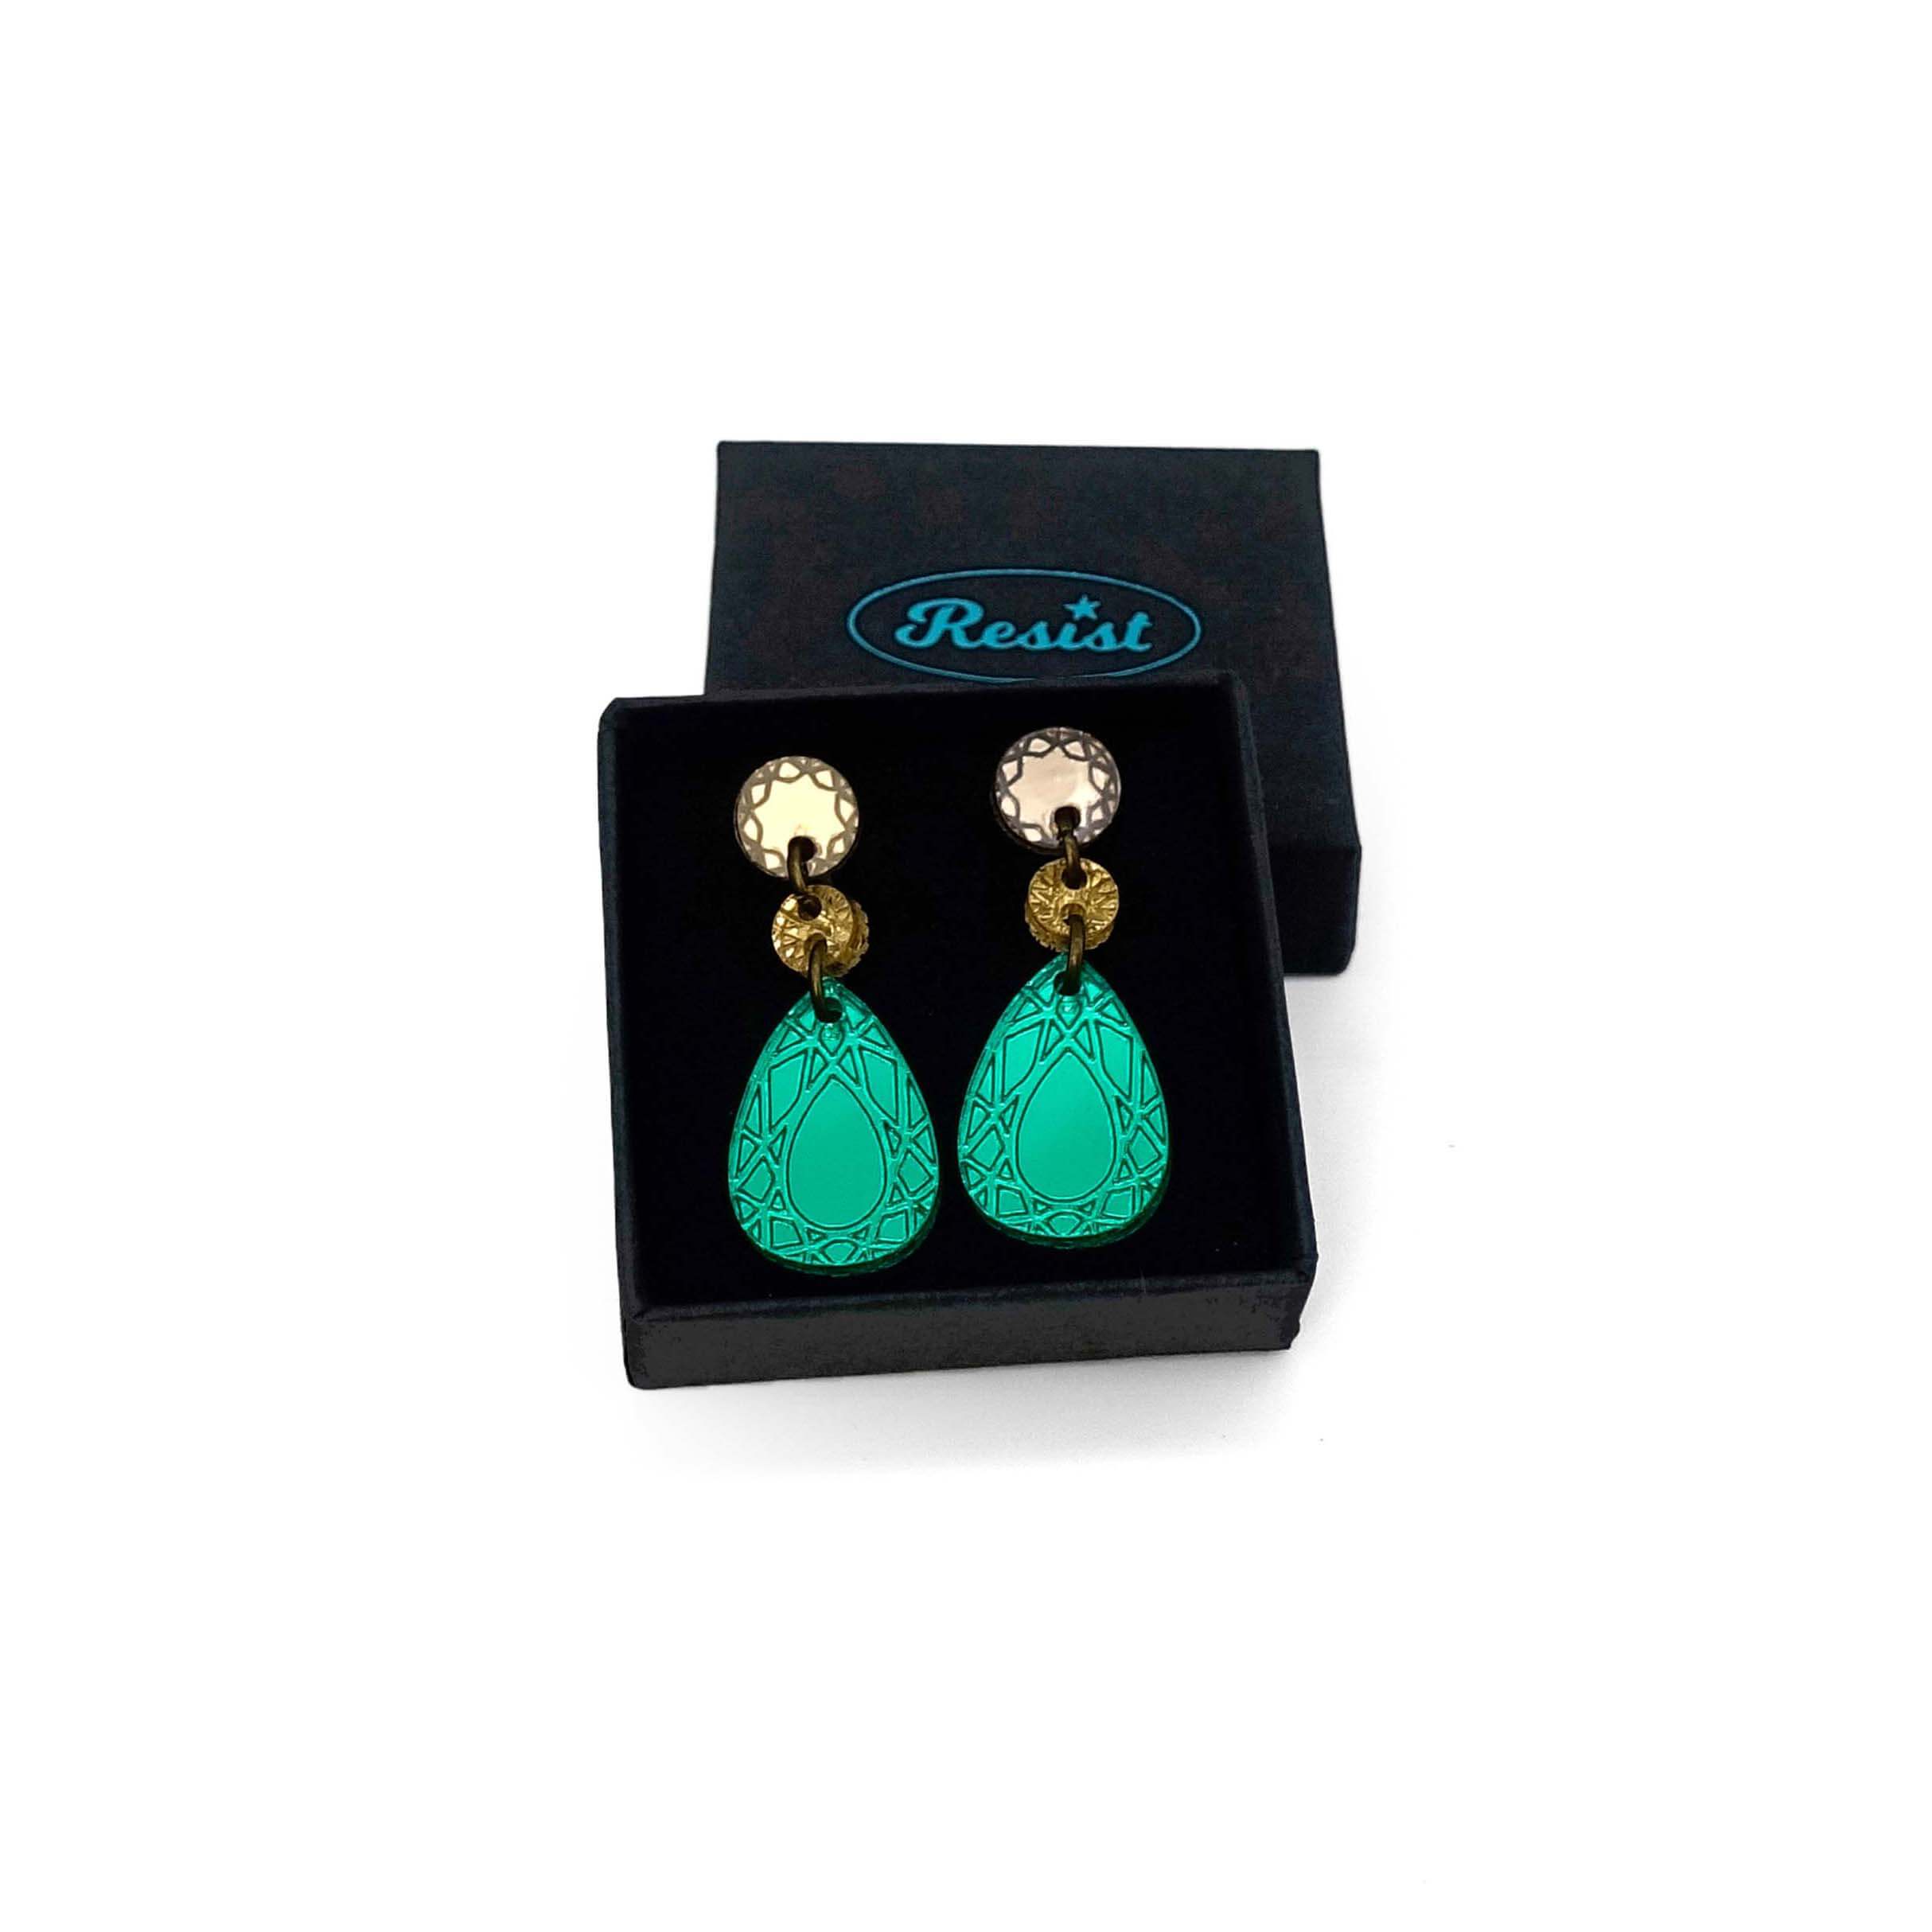 Belle Époque french drop earrings in electric green. Shown in a small Wear and Resist gift box.  